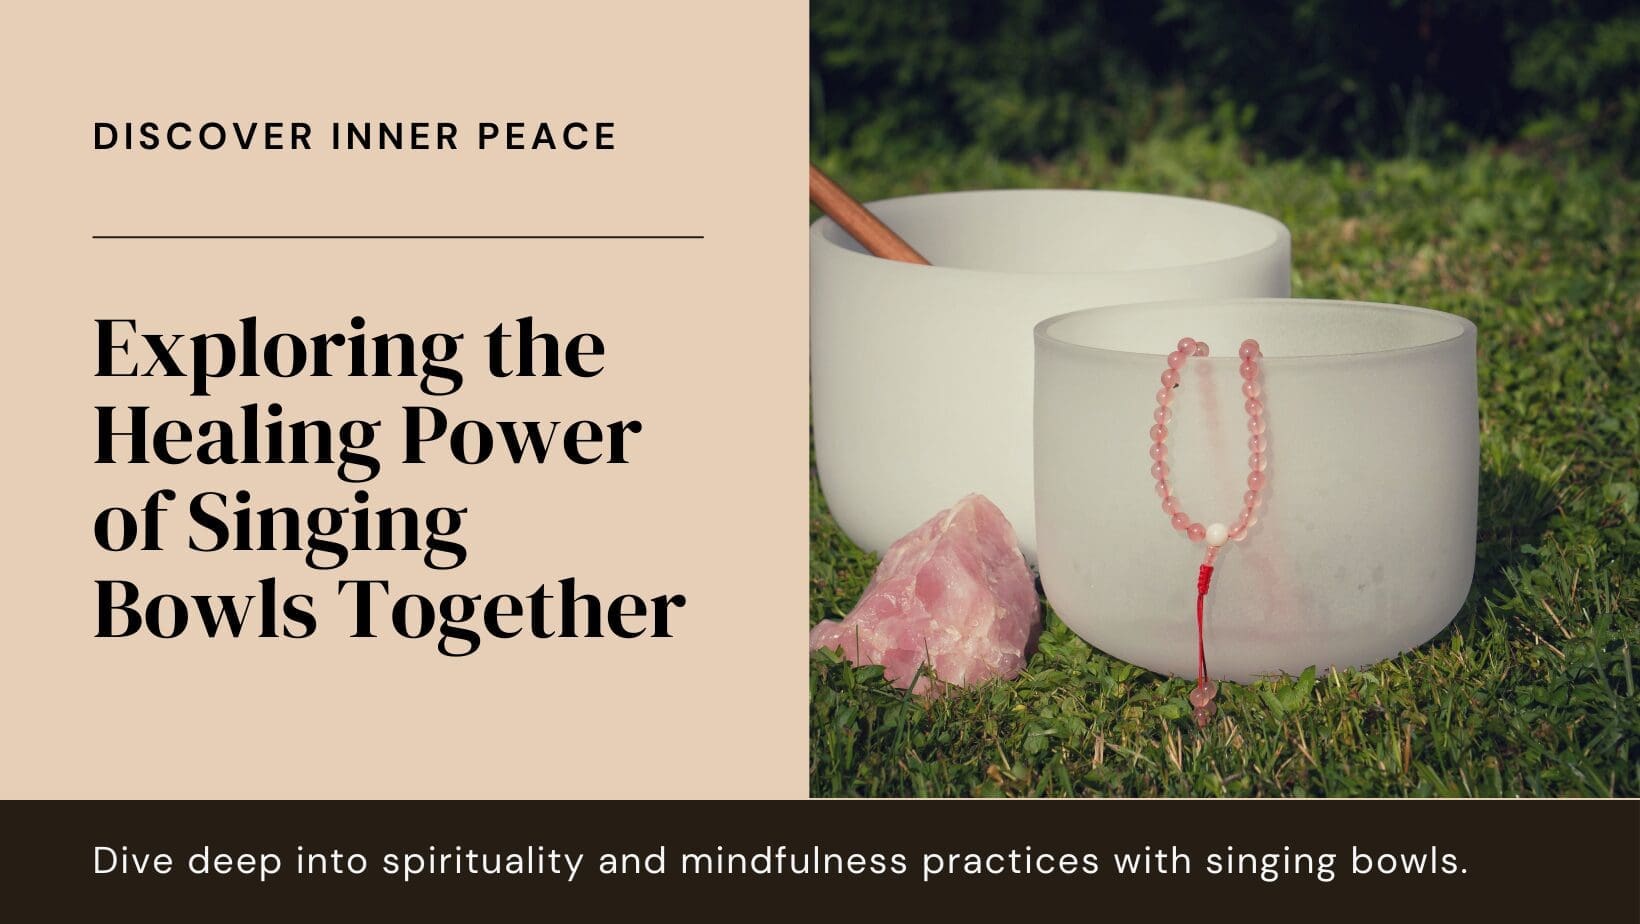 Singing Bowls and Spirituality: How Do These Two Intertwine?